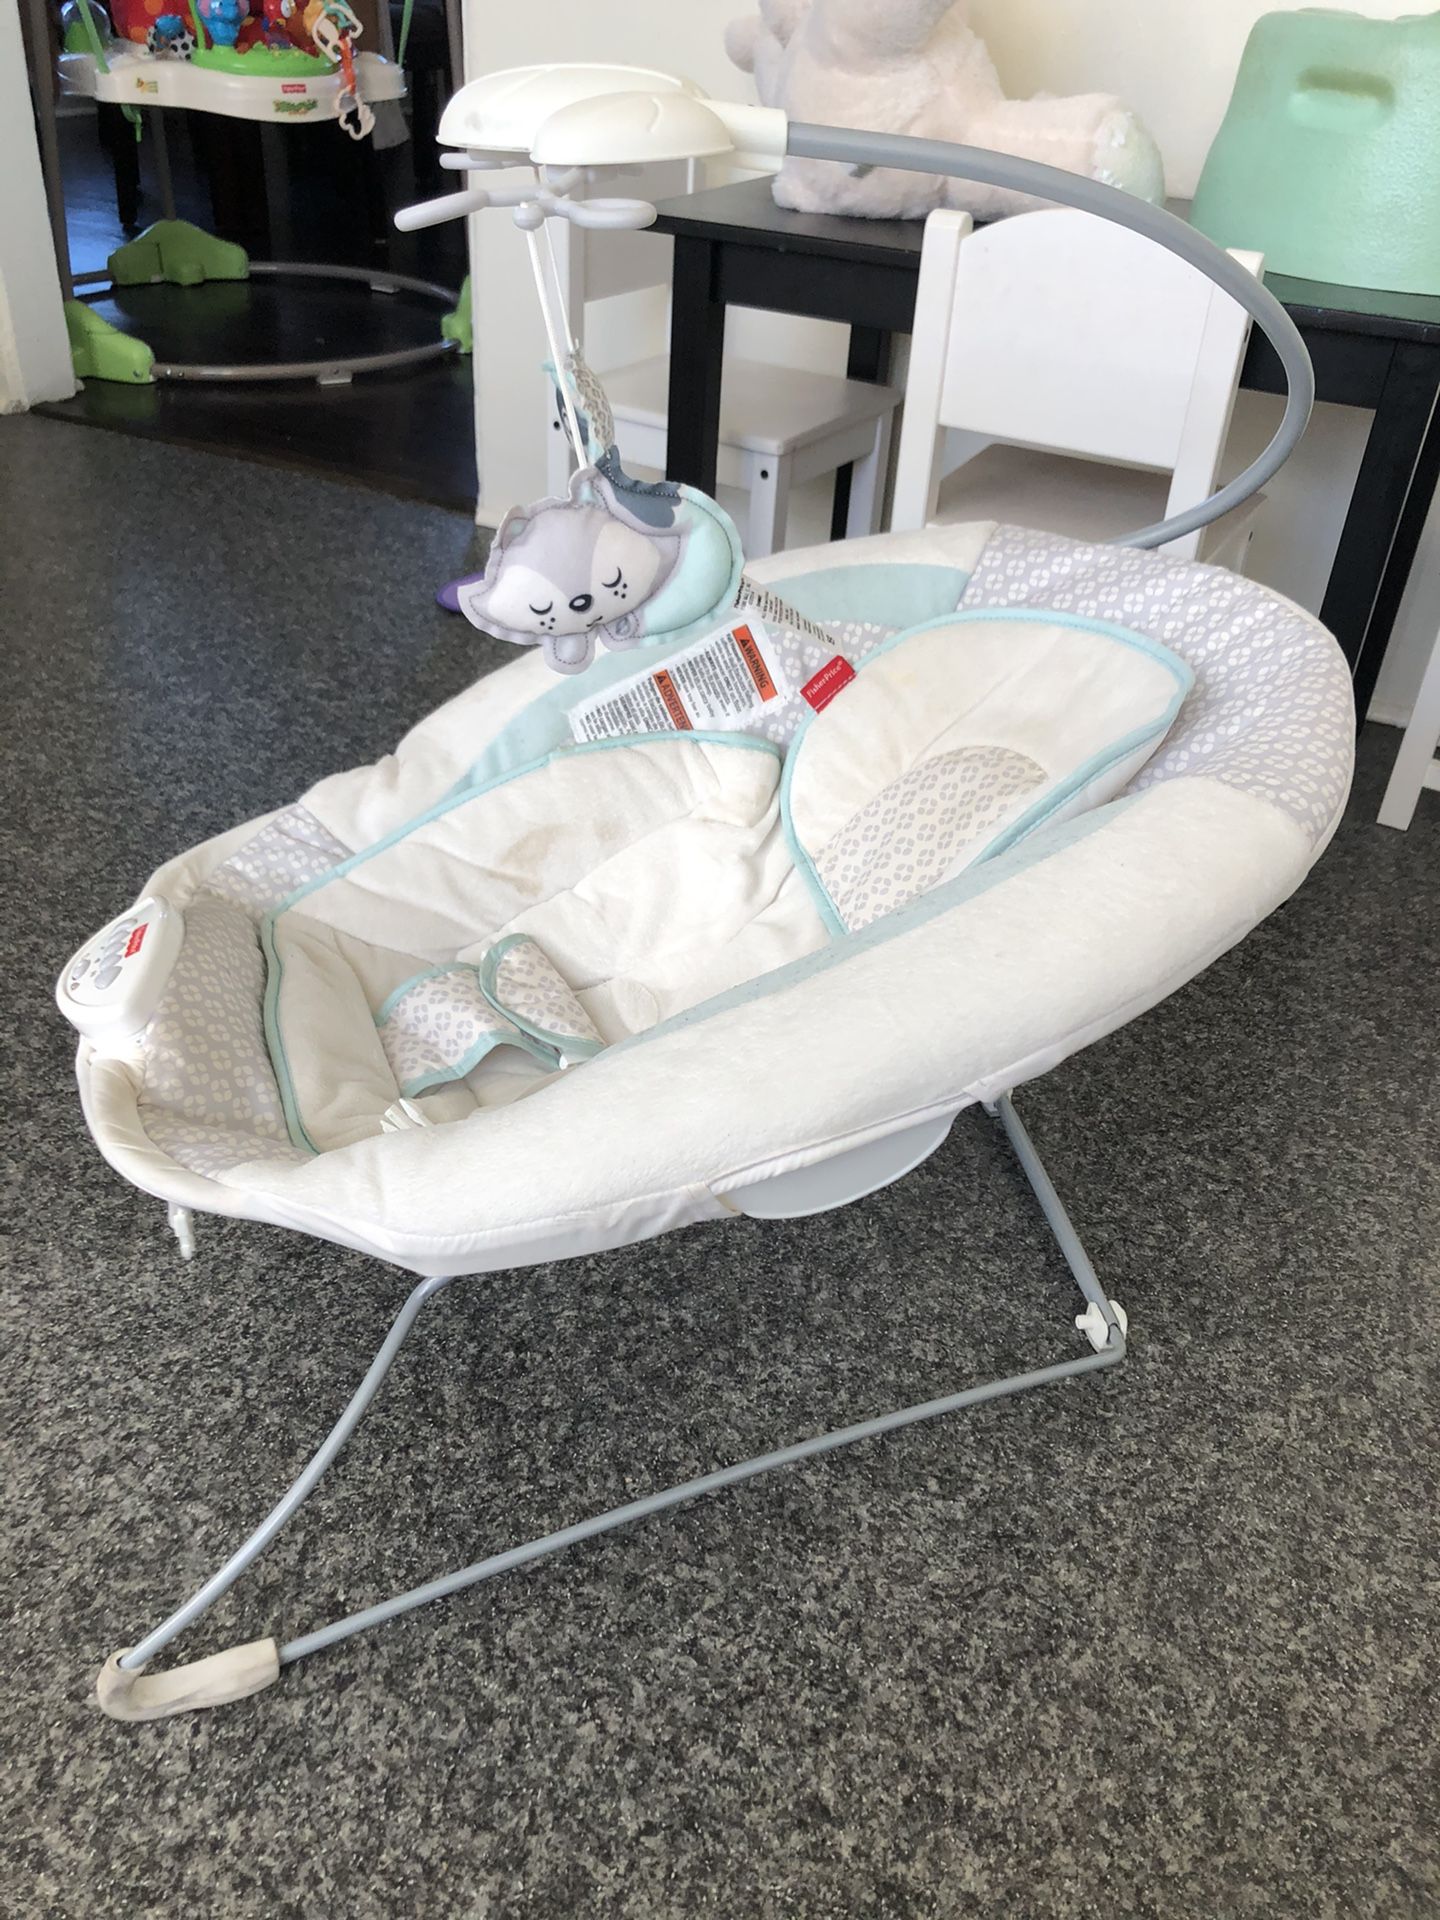 Infant recliner chair with vibrate/ music